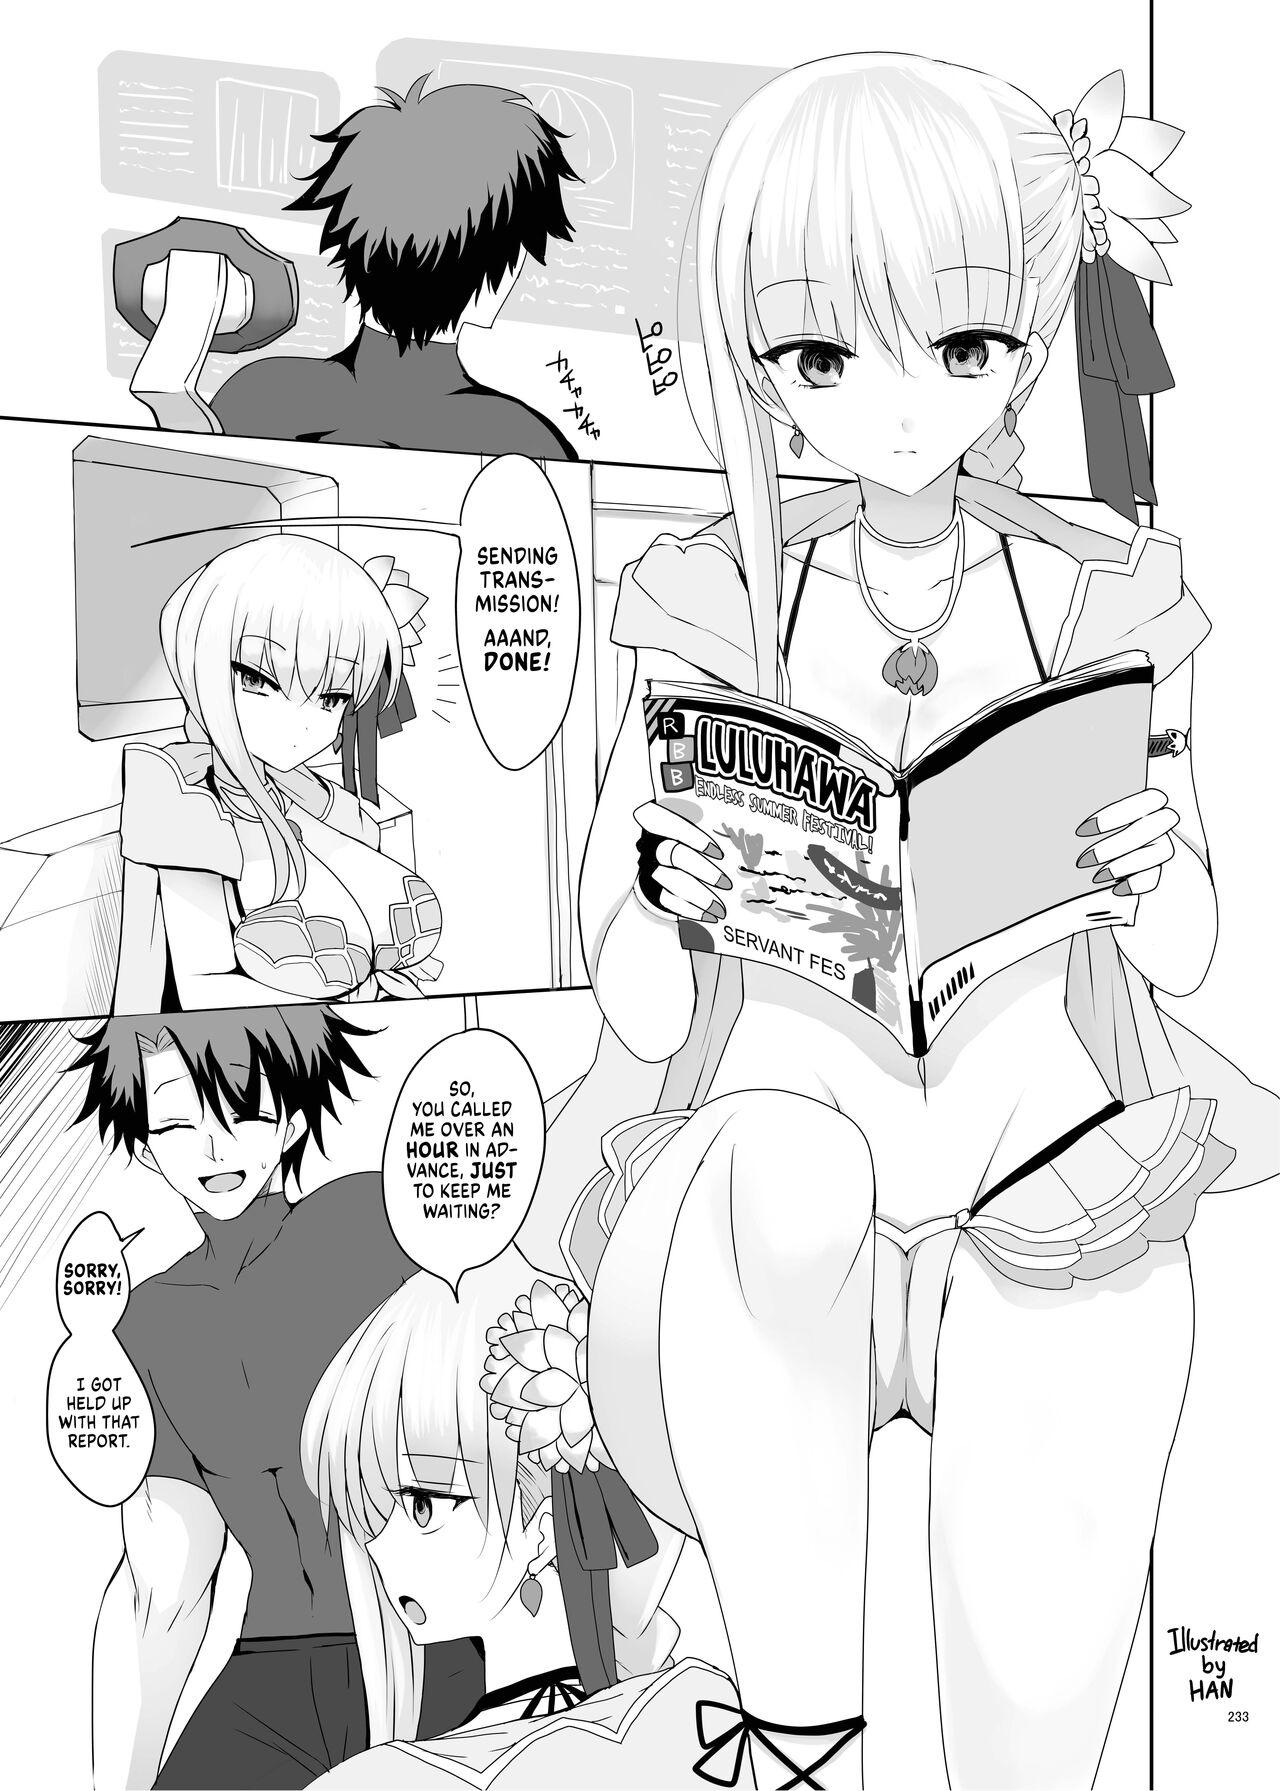 Hair Kama - Fate grand order Two - Page 1